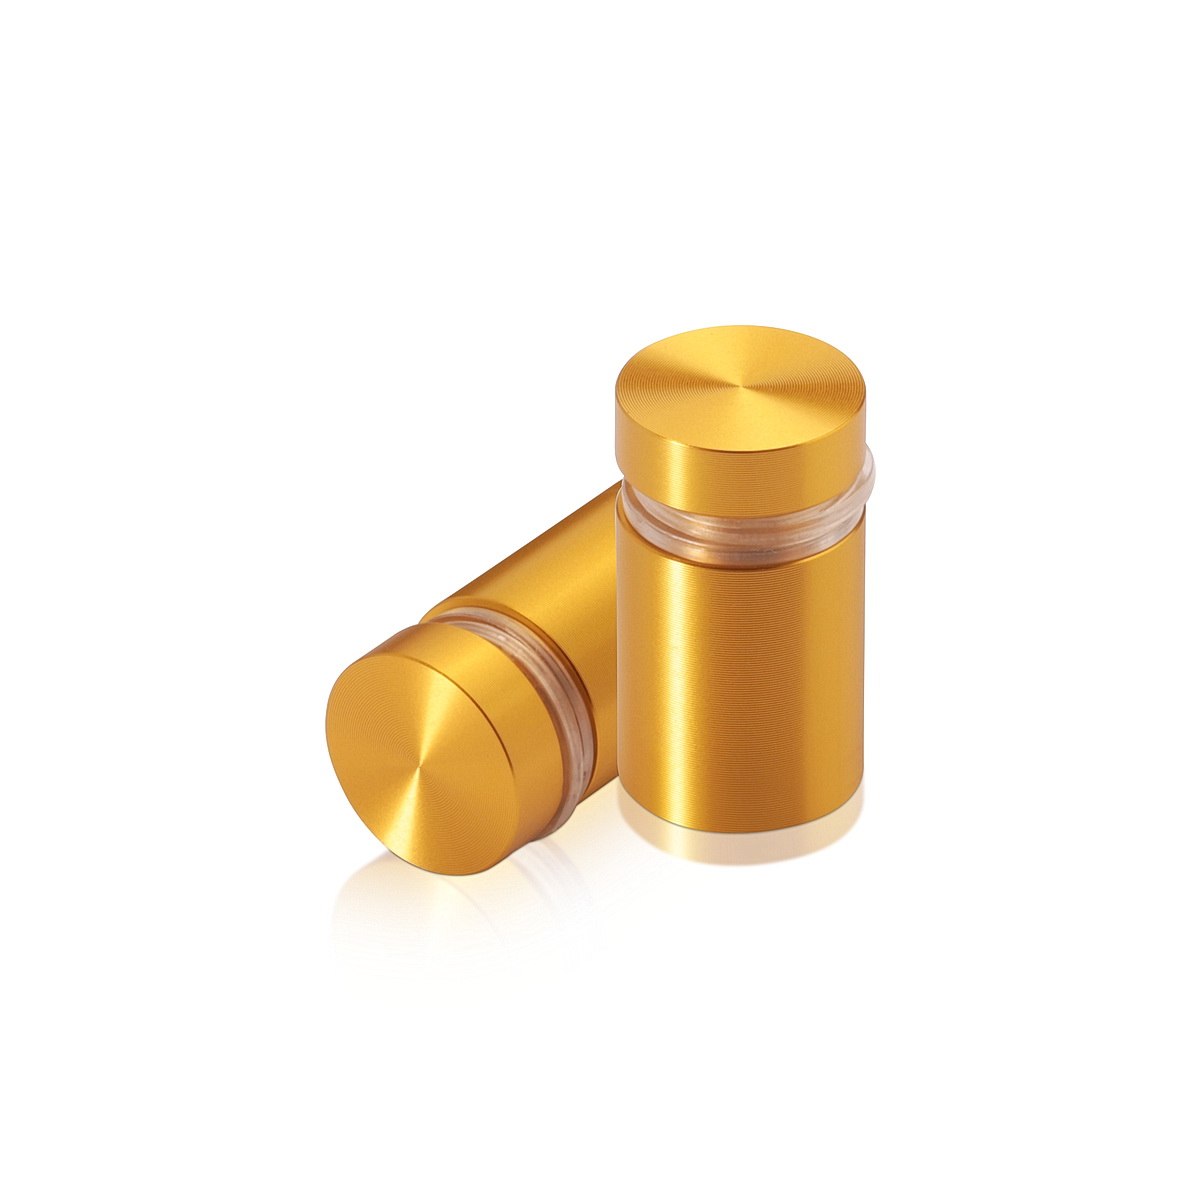 5/8'' Diameter X 3/4'' Barrel Length, Aluminum Flat Head Standoffs, Gold Anodized Finish Easy Fasten Standoff (For Inside / Outside use) Tamper Proof Standoff [Required Material Hole Size: 7/16'']